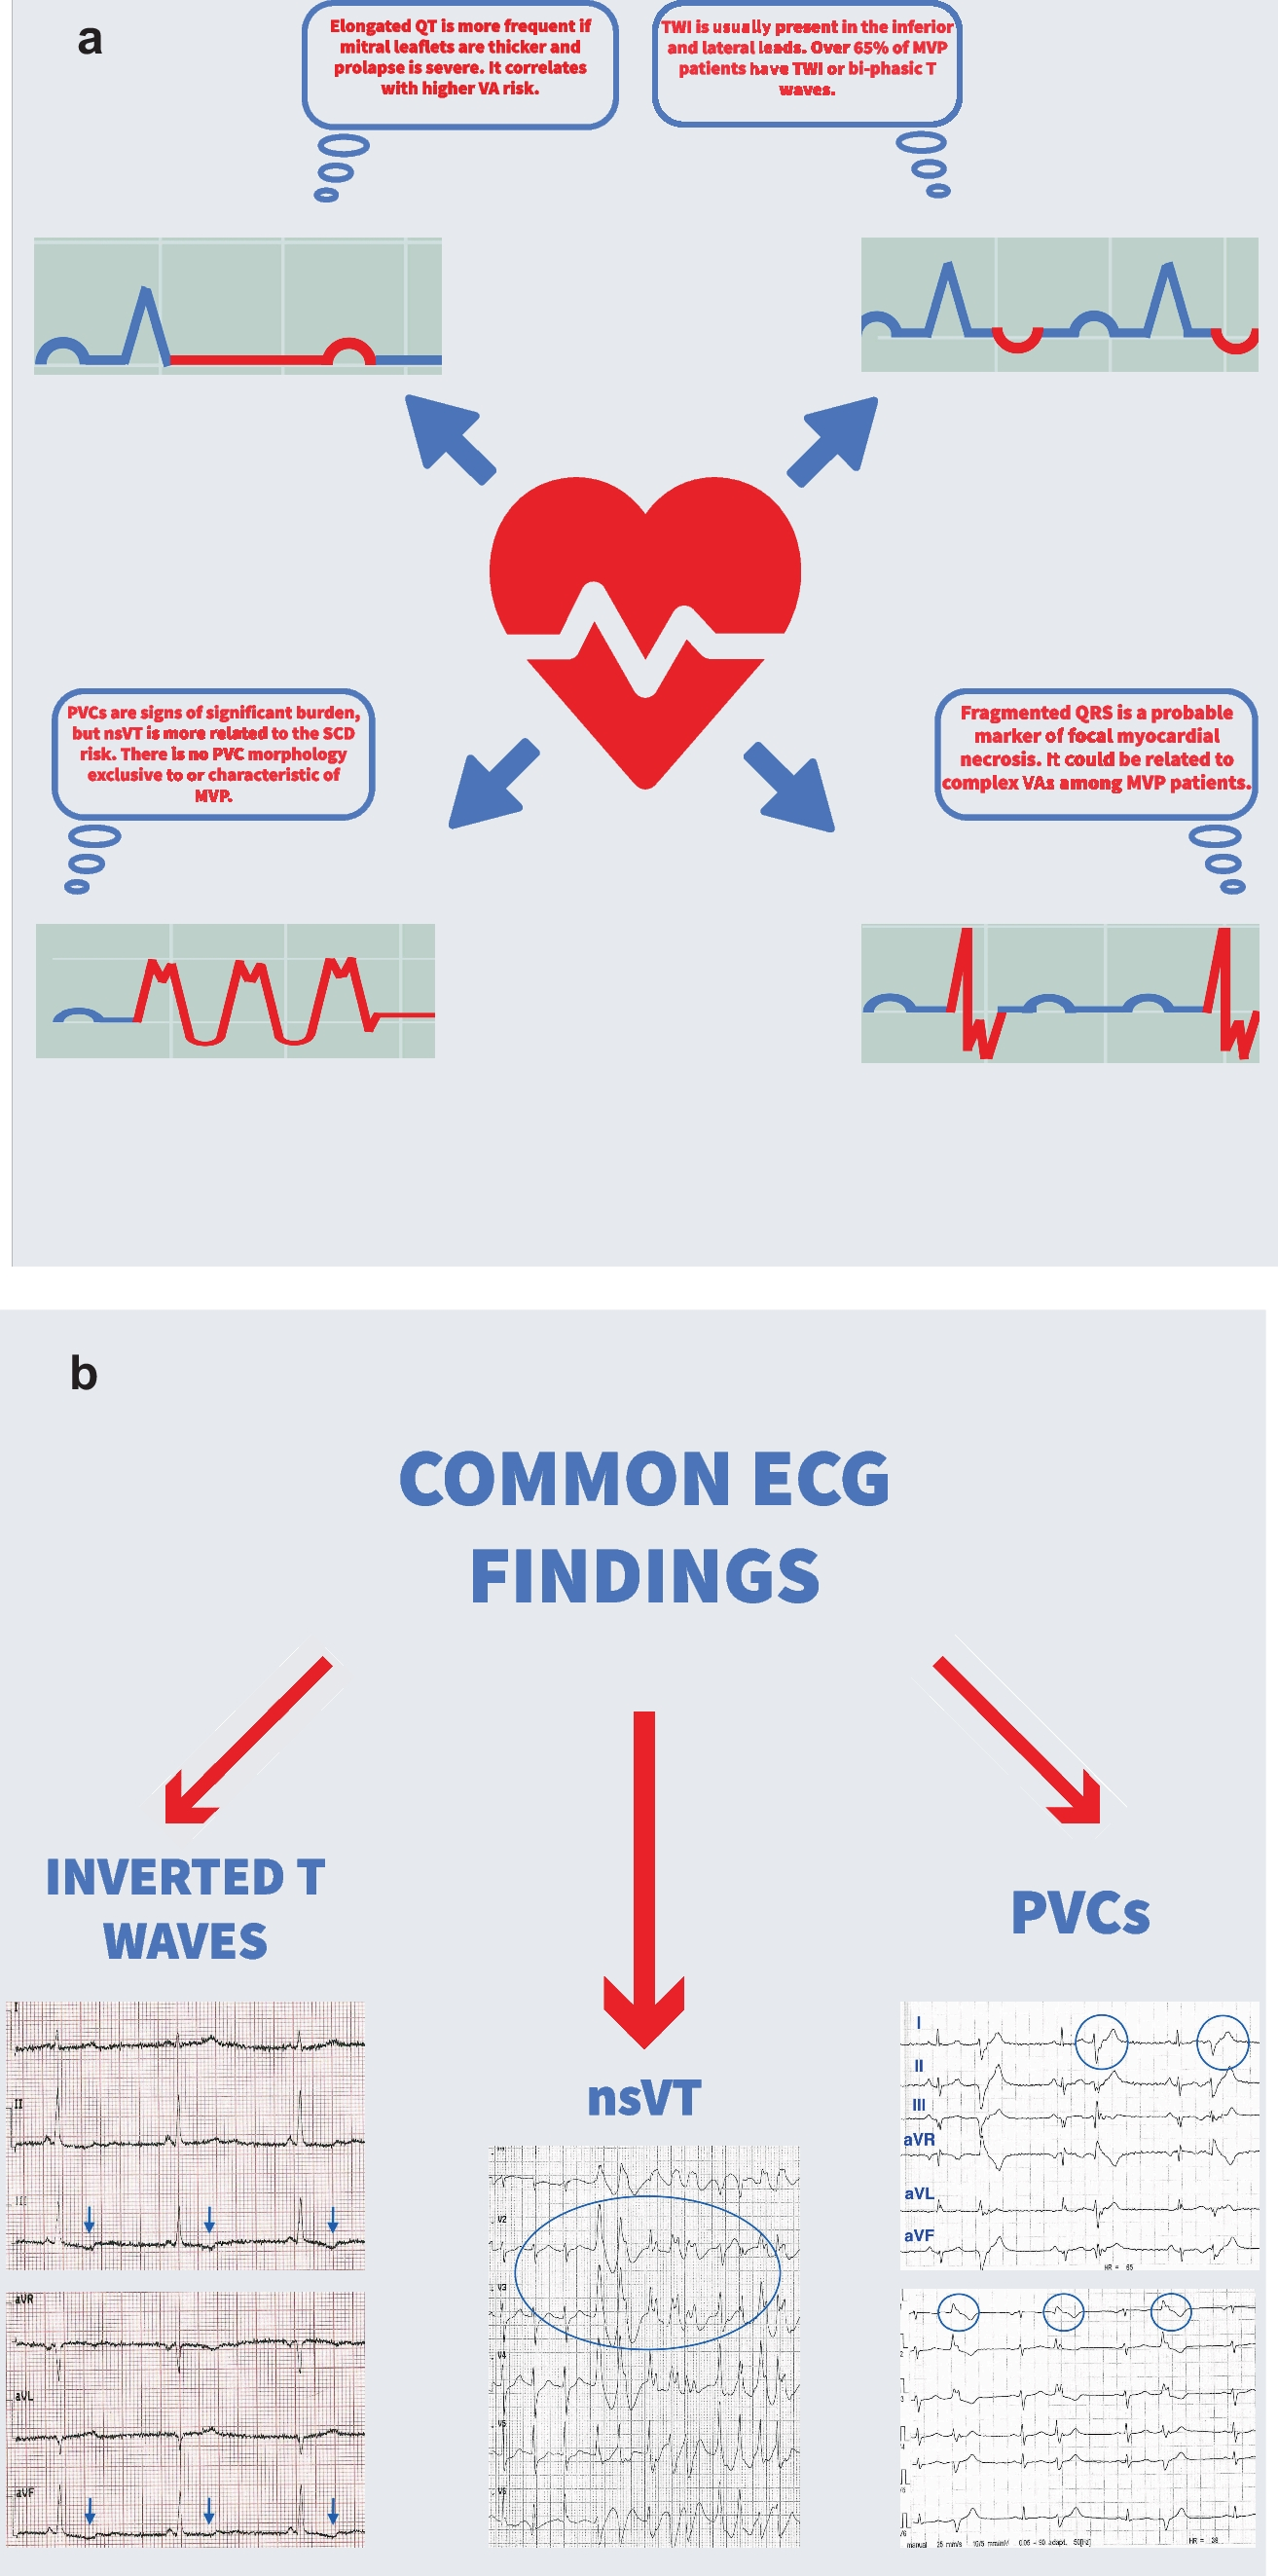 What Do We Know So Far About Ventricular Arrhythmias and Sudden Cardiac Death Prediction in the Mitral Valve Prolapse Population? Could Biomarkers Help Us Predict Their Occurrence?